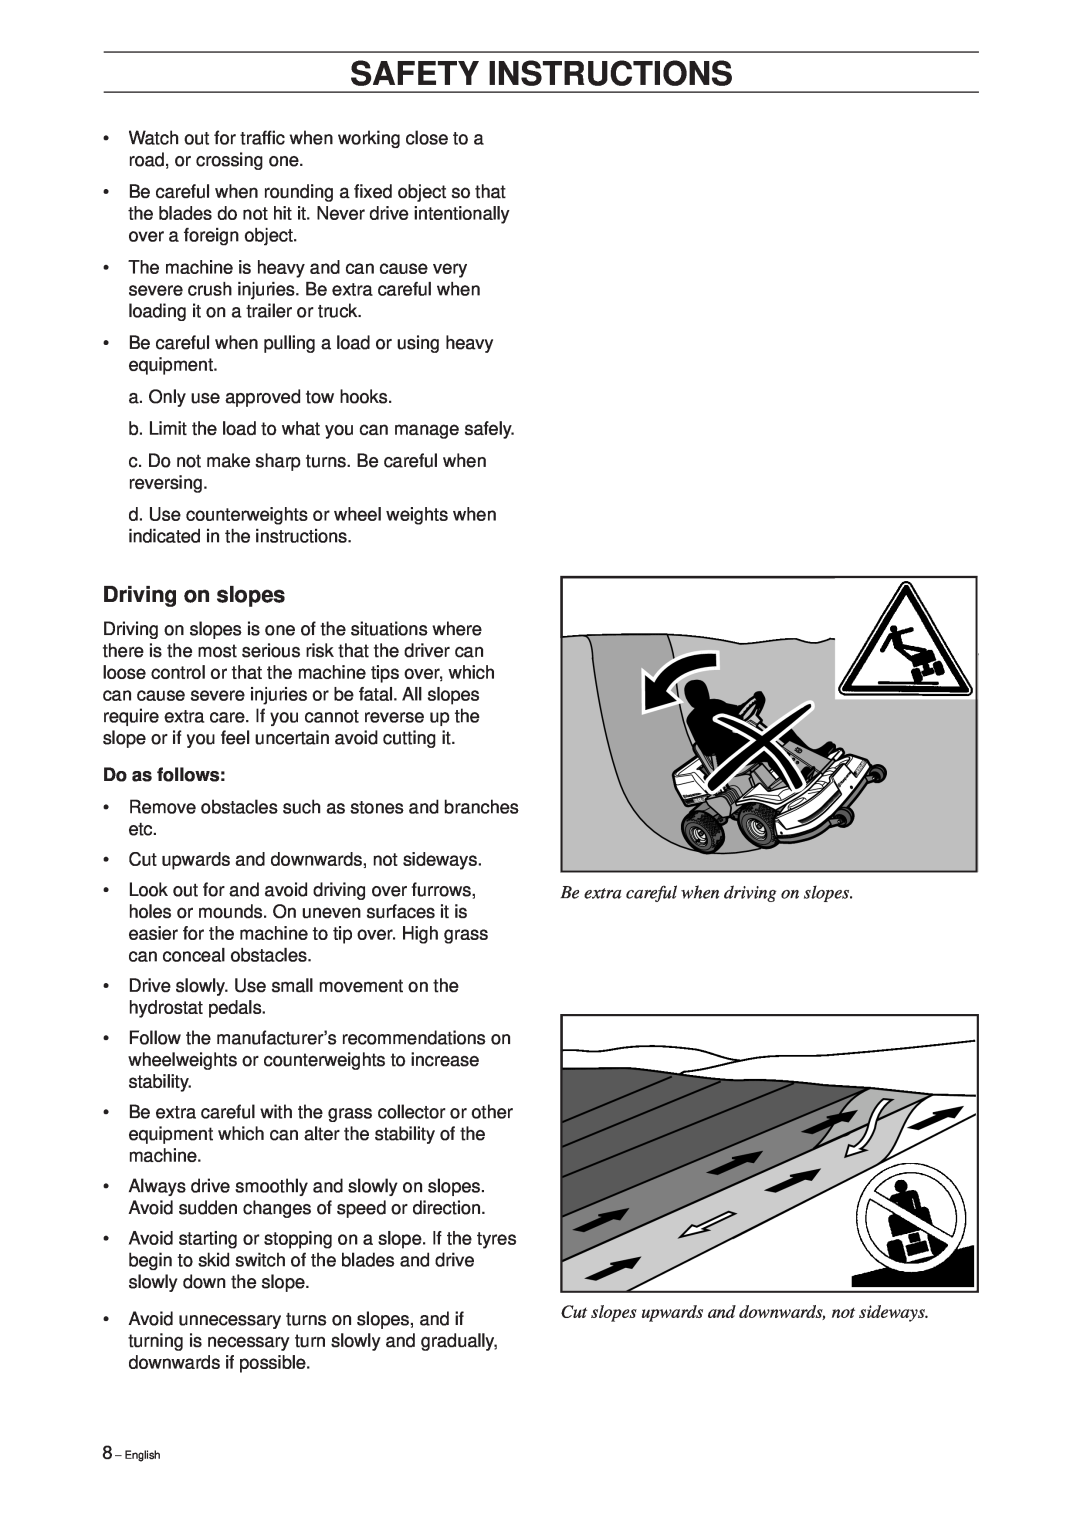 Husqvarna Rider 16 manual Driving on slopes, Do as follows, Be extra careful when driving on slopes, Safety Instructions 